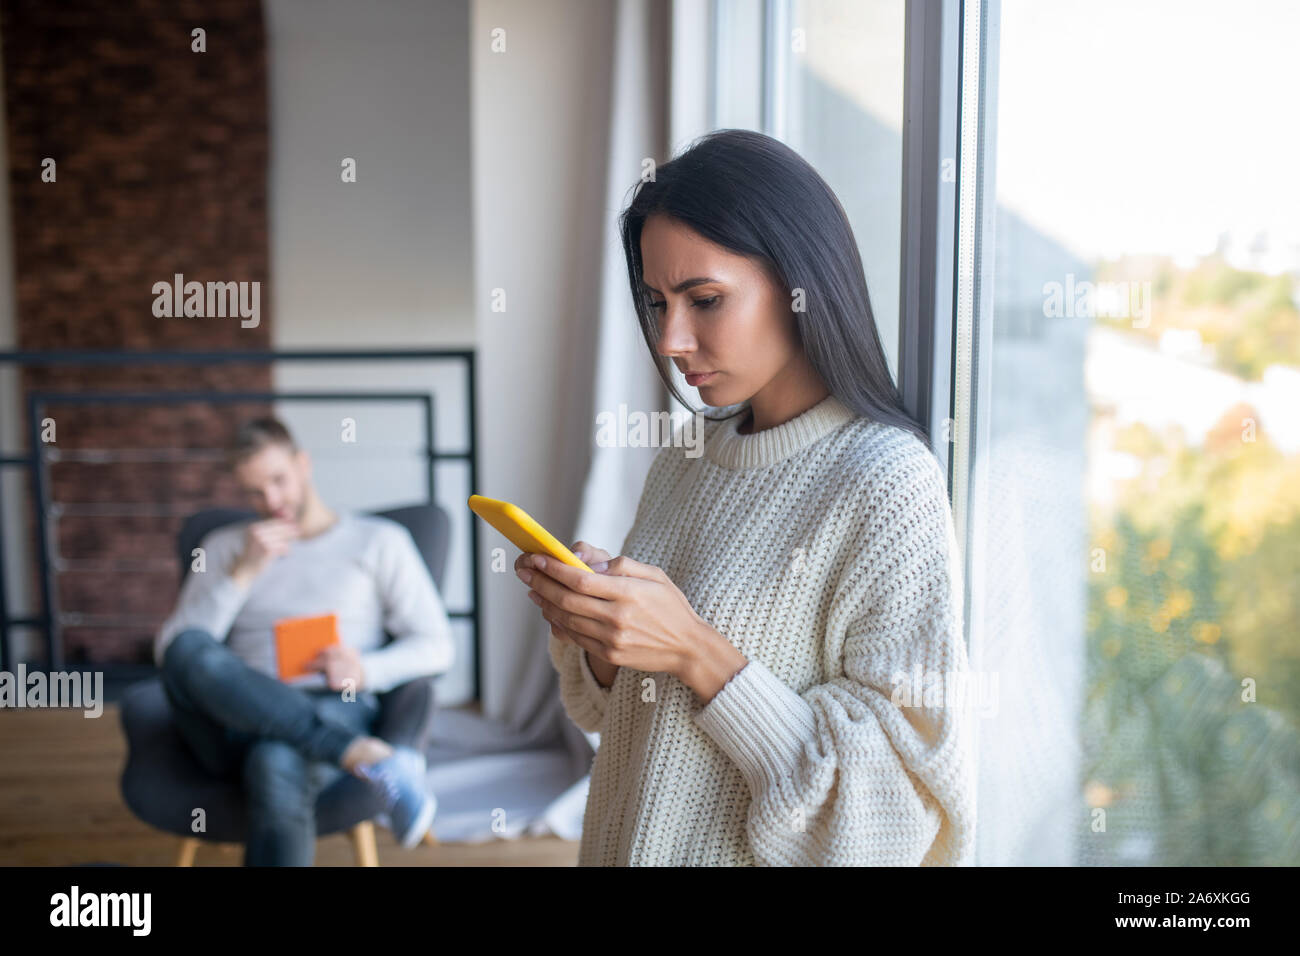 Wife holding her smartphone while reading messages Stock Photo